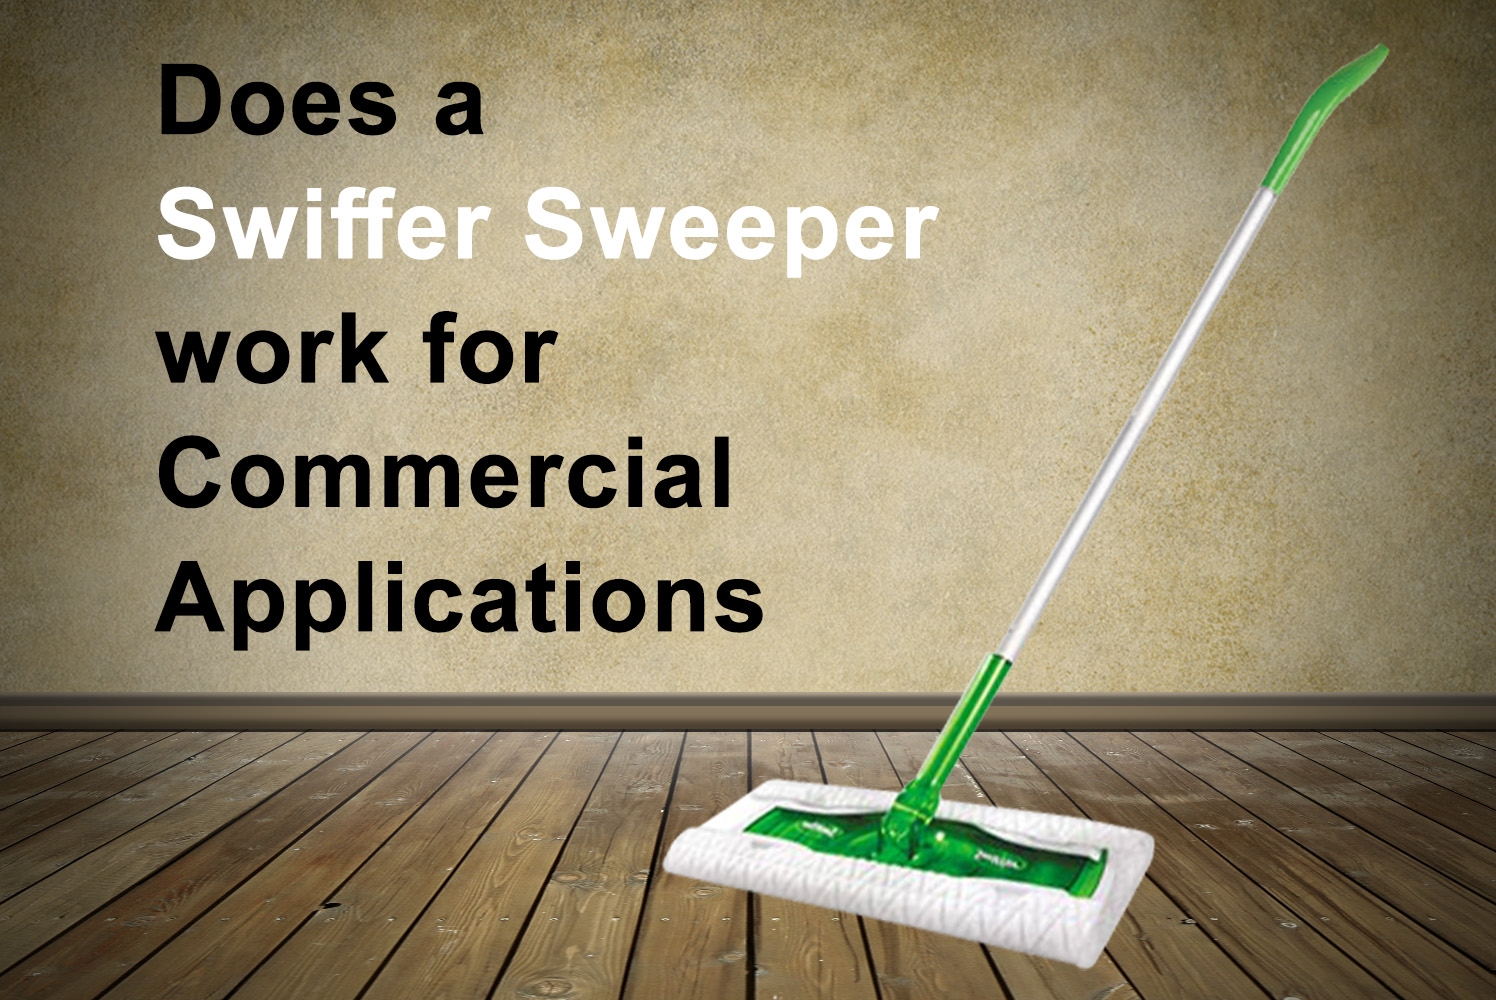 Does a Swiffer Sweeper work for Commercial Applications – Pros and Cons